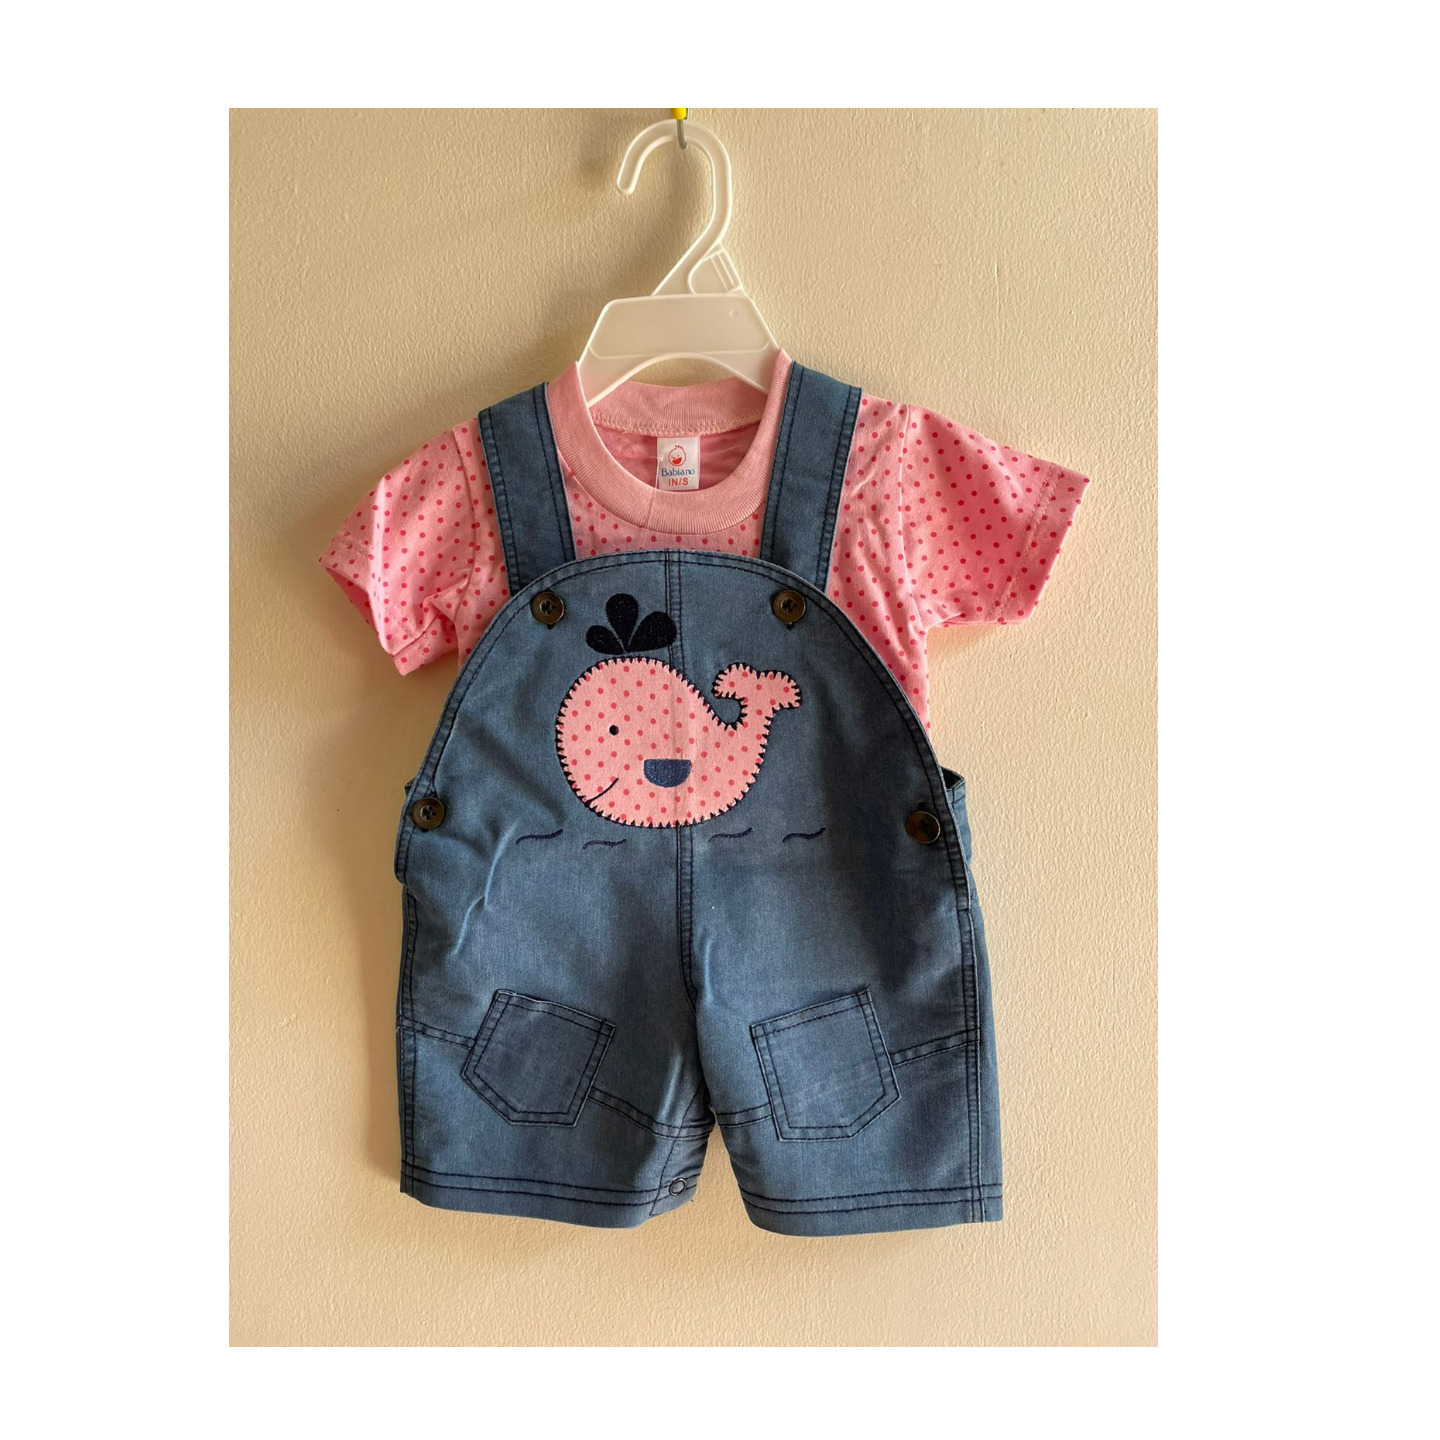 Babiano Fish Sun Romper Set Rs 750 Made In India 3 Months to 3.5 Years Size